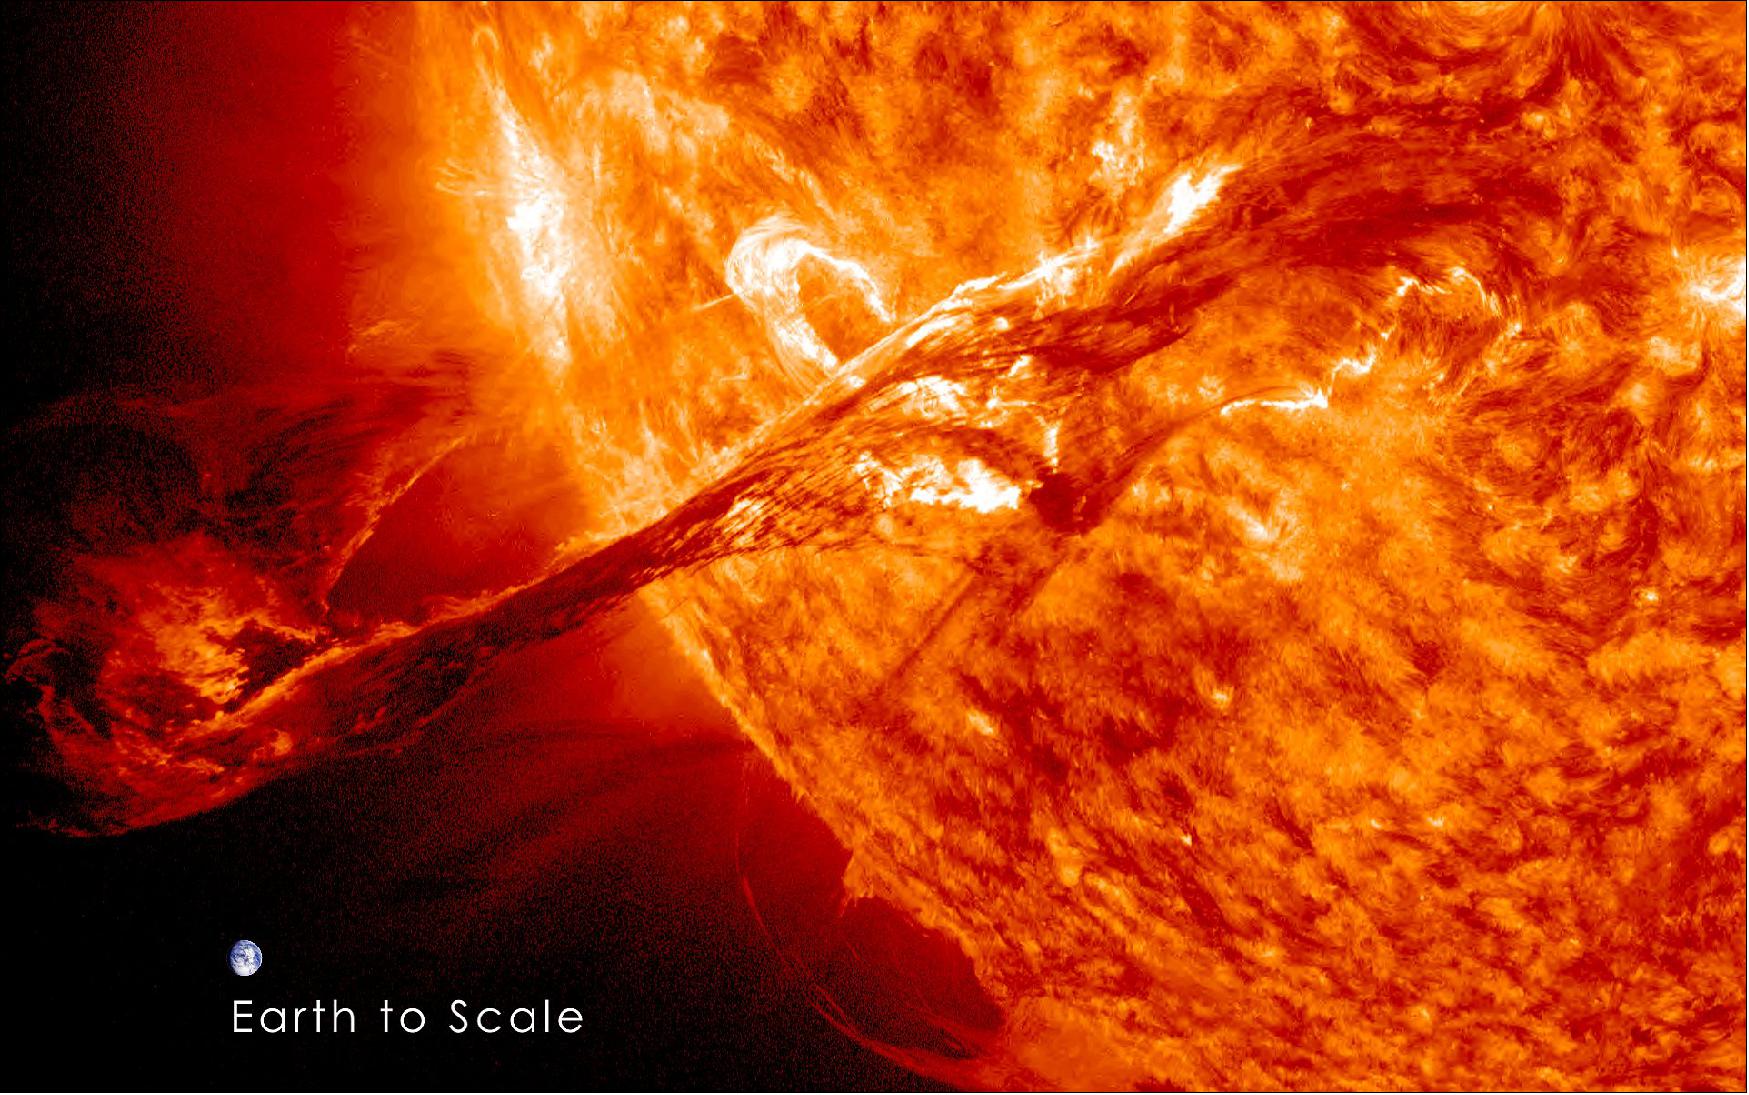 Figure 1: A dramatic coronal mass ejection event (CME) on August 31, 2012, captured by NASA's STEREO mission and the joint ESA/NASA SOHO mission. The size of the Earth is shown relative to the size of the CME filament (image credit: NASA Goddard Media Studios)